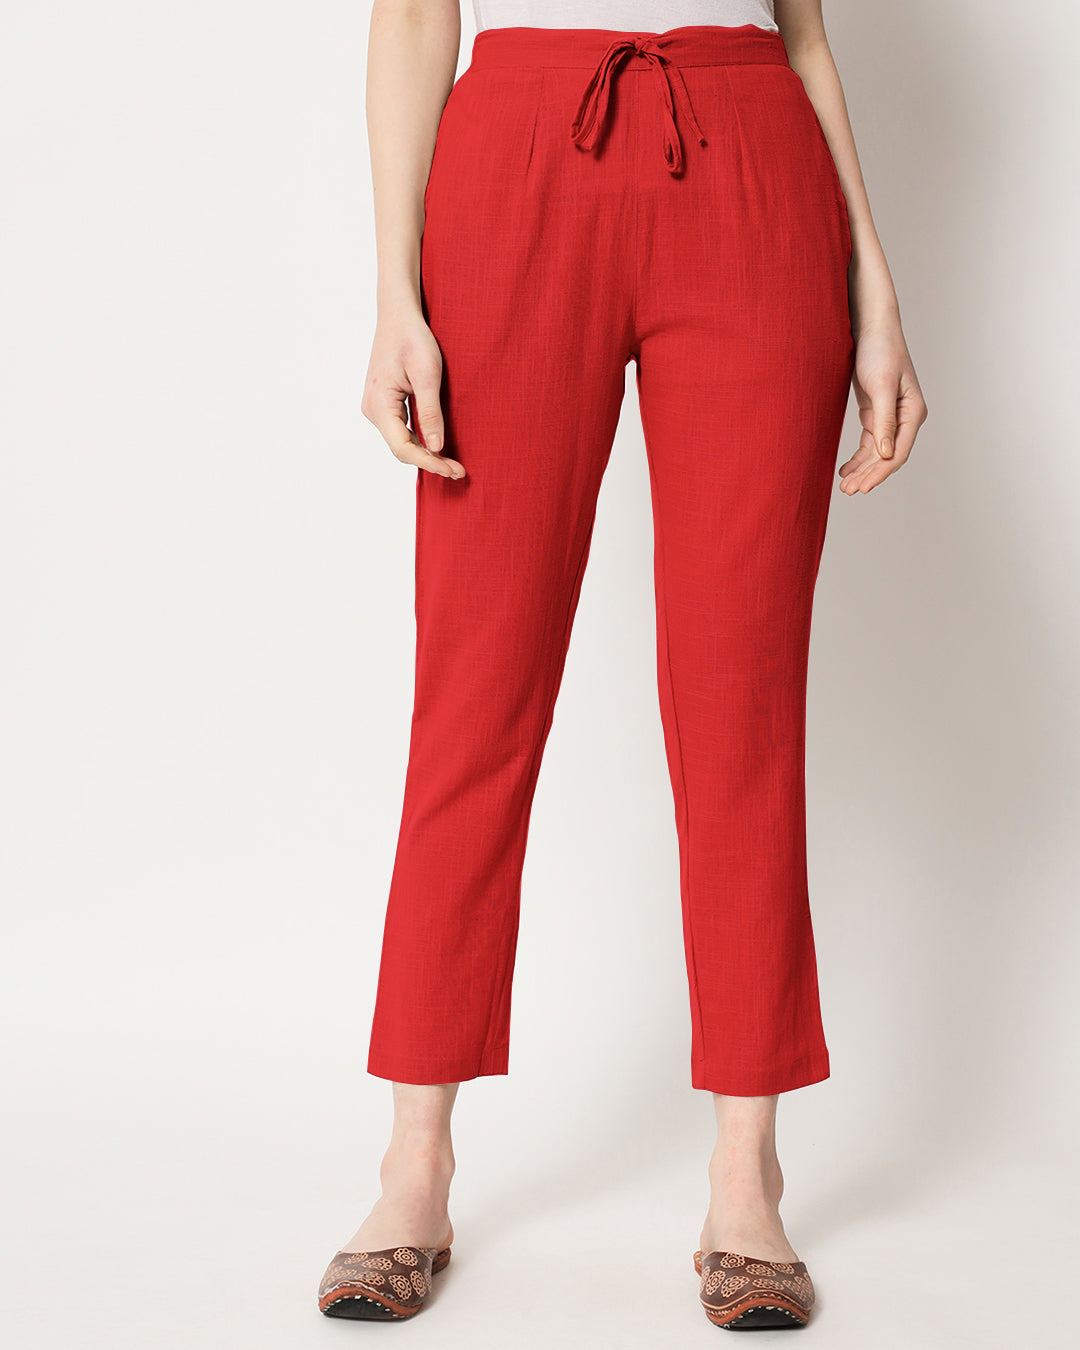 Combo: Classic Red & Pink Mist Cigarette Pants- Set of 2